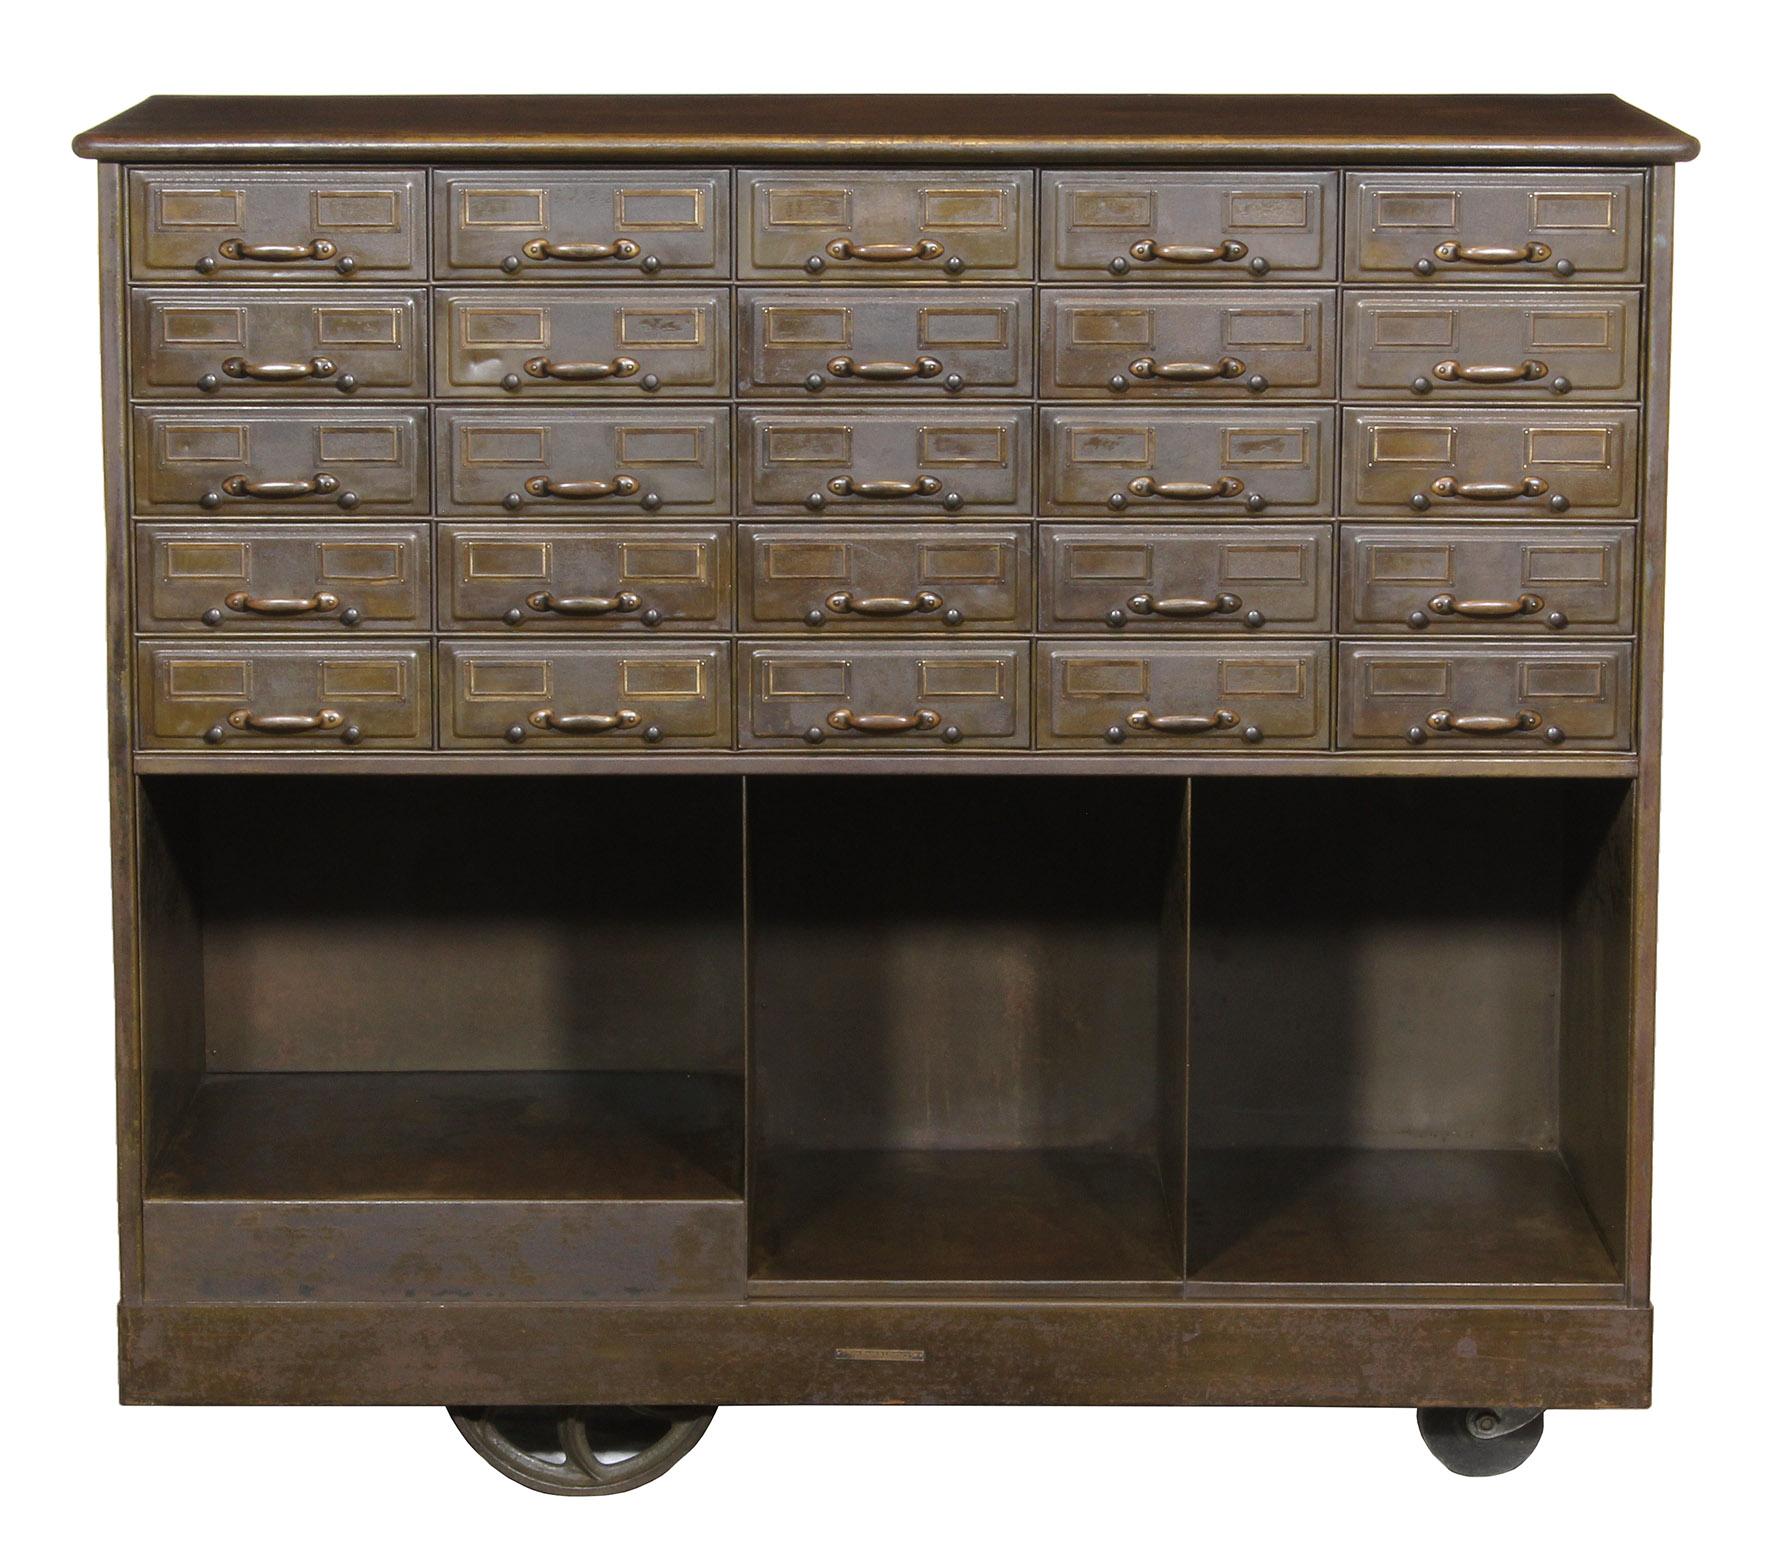 Vintage industrial multi drawer steel cabinet/cart. By Office Bank & Liberty Co.